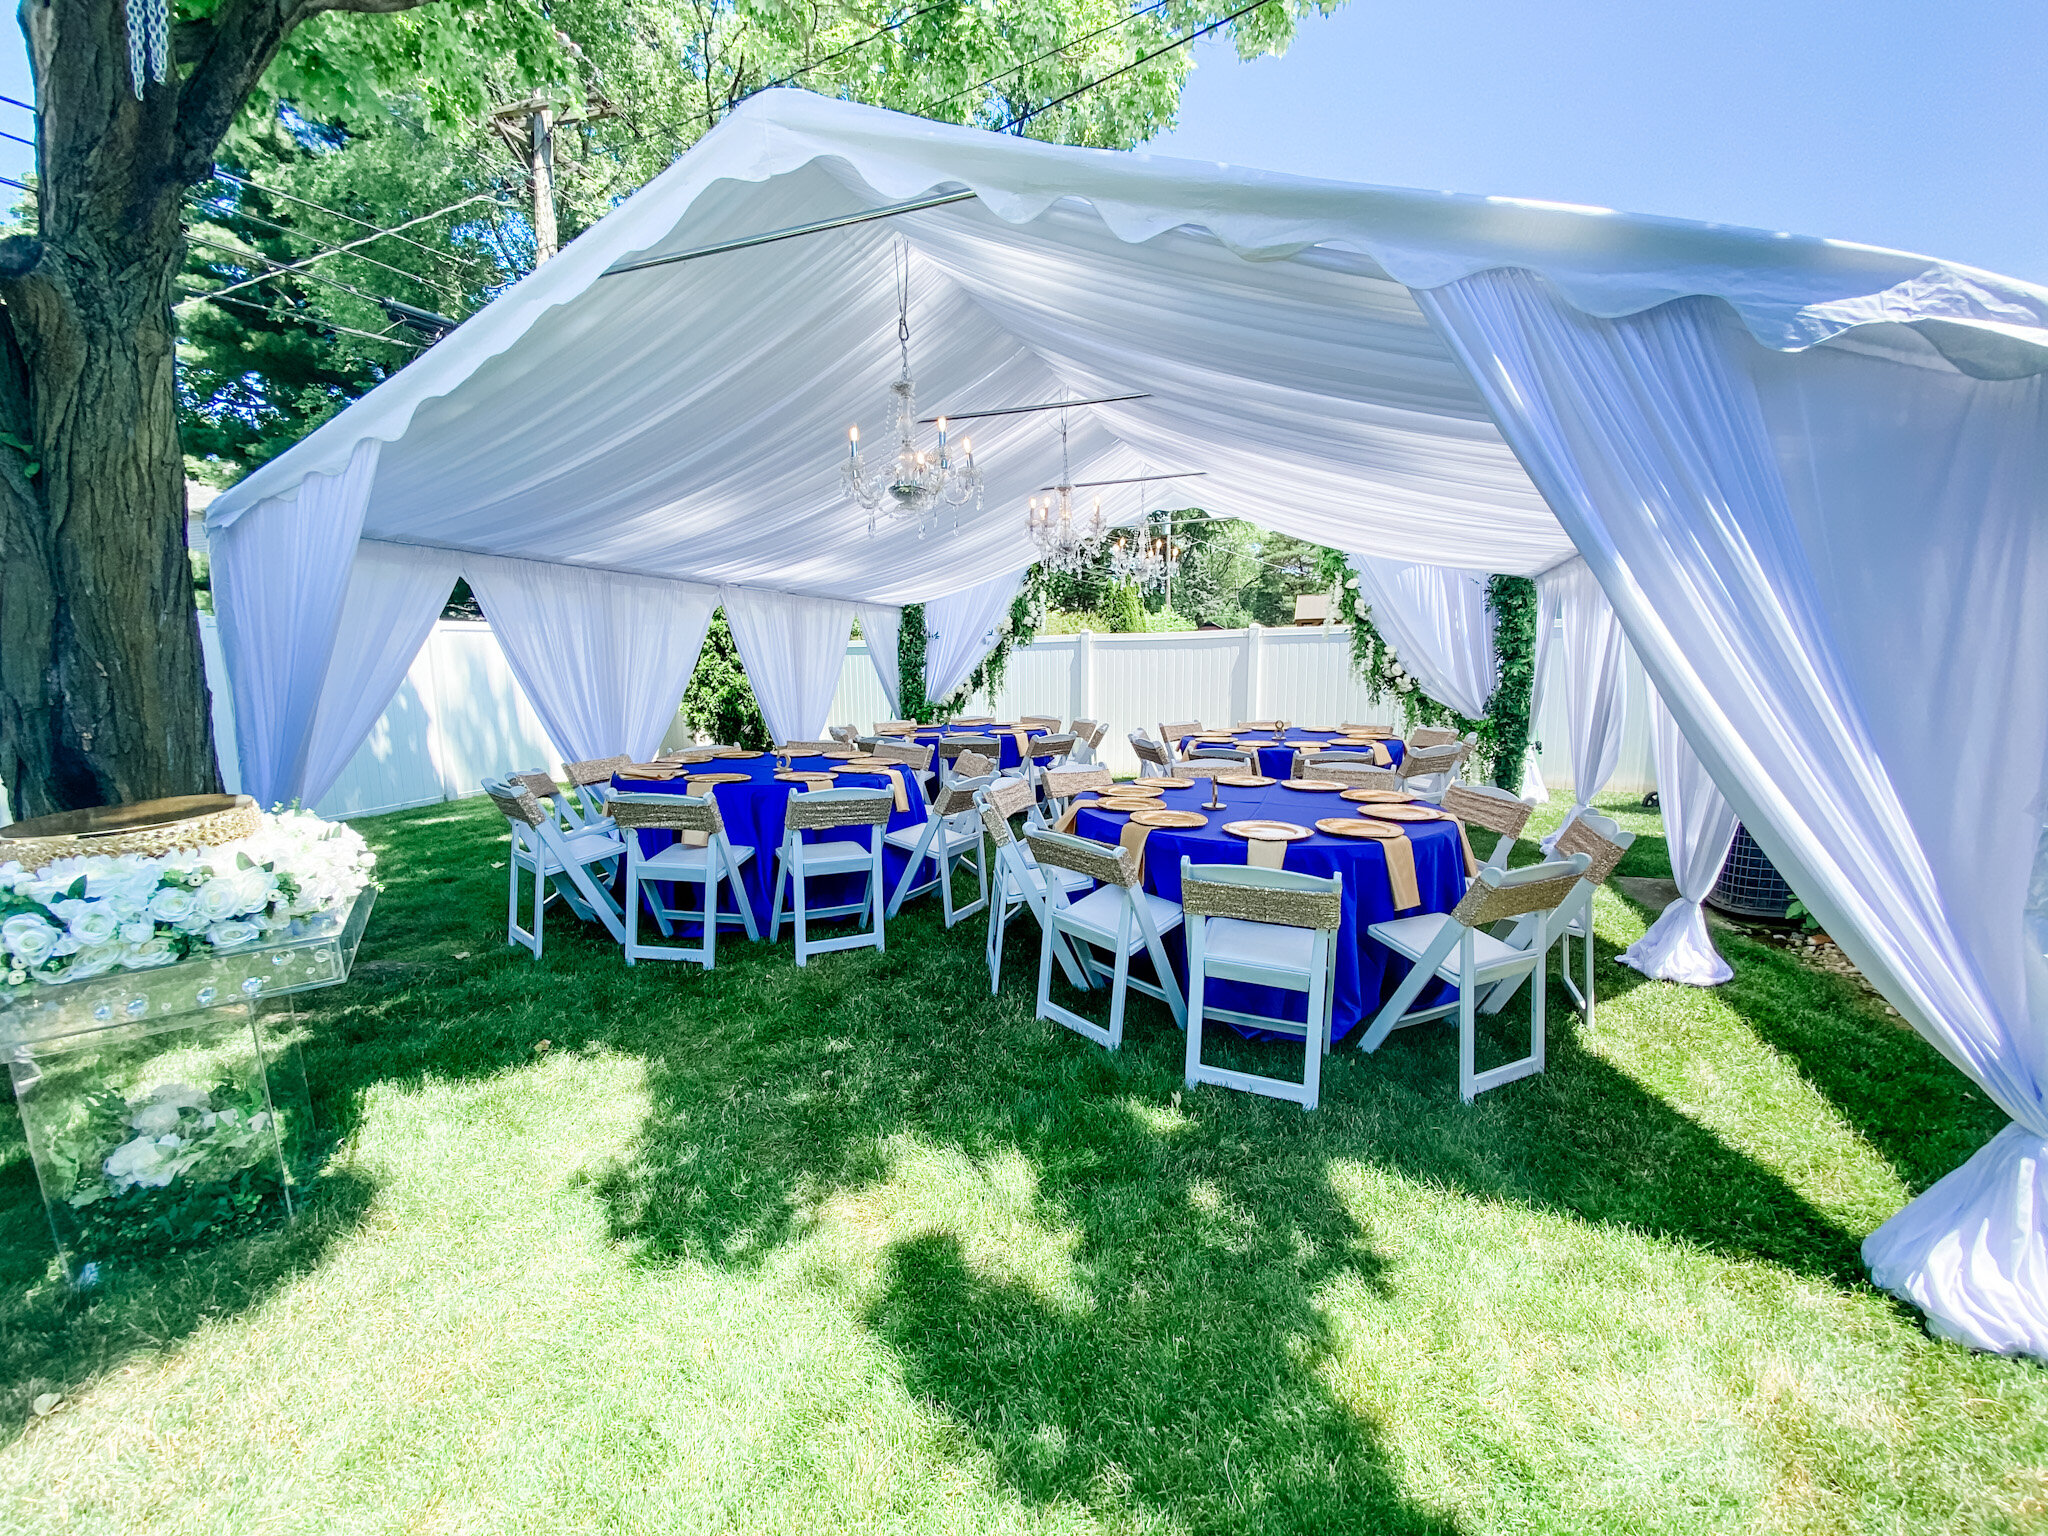 tent rental in Napervill eoutdoor party decoration backyard wedding micro wedding outdoor party rental naperville frame tents festival tent birthday party tent backyard wedding tent corpporate event tent   (12).JPG